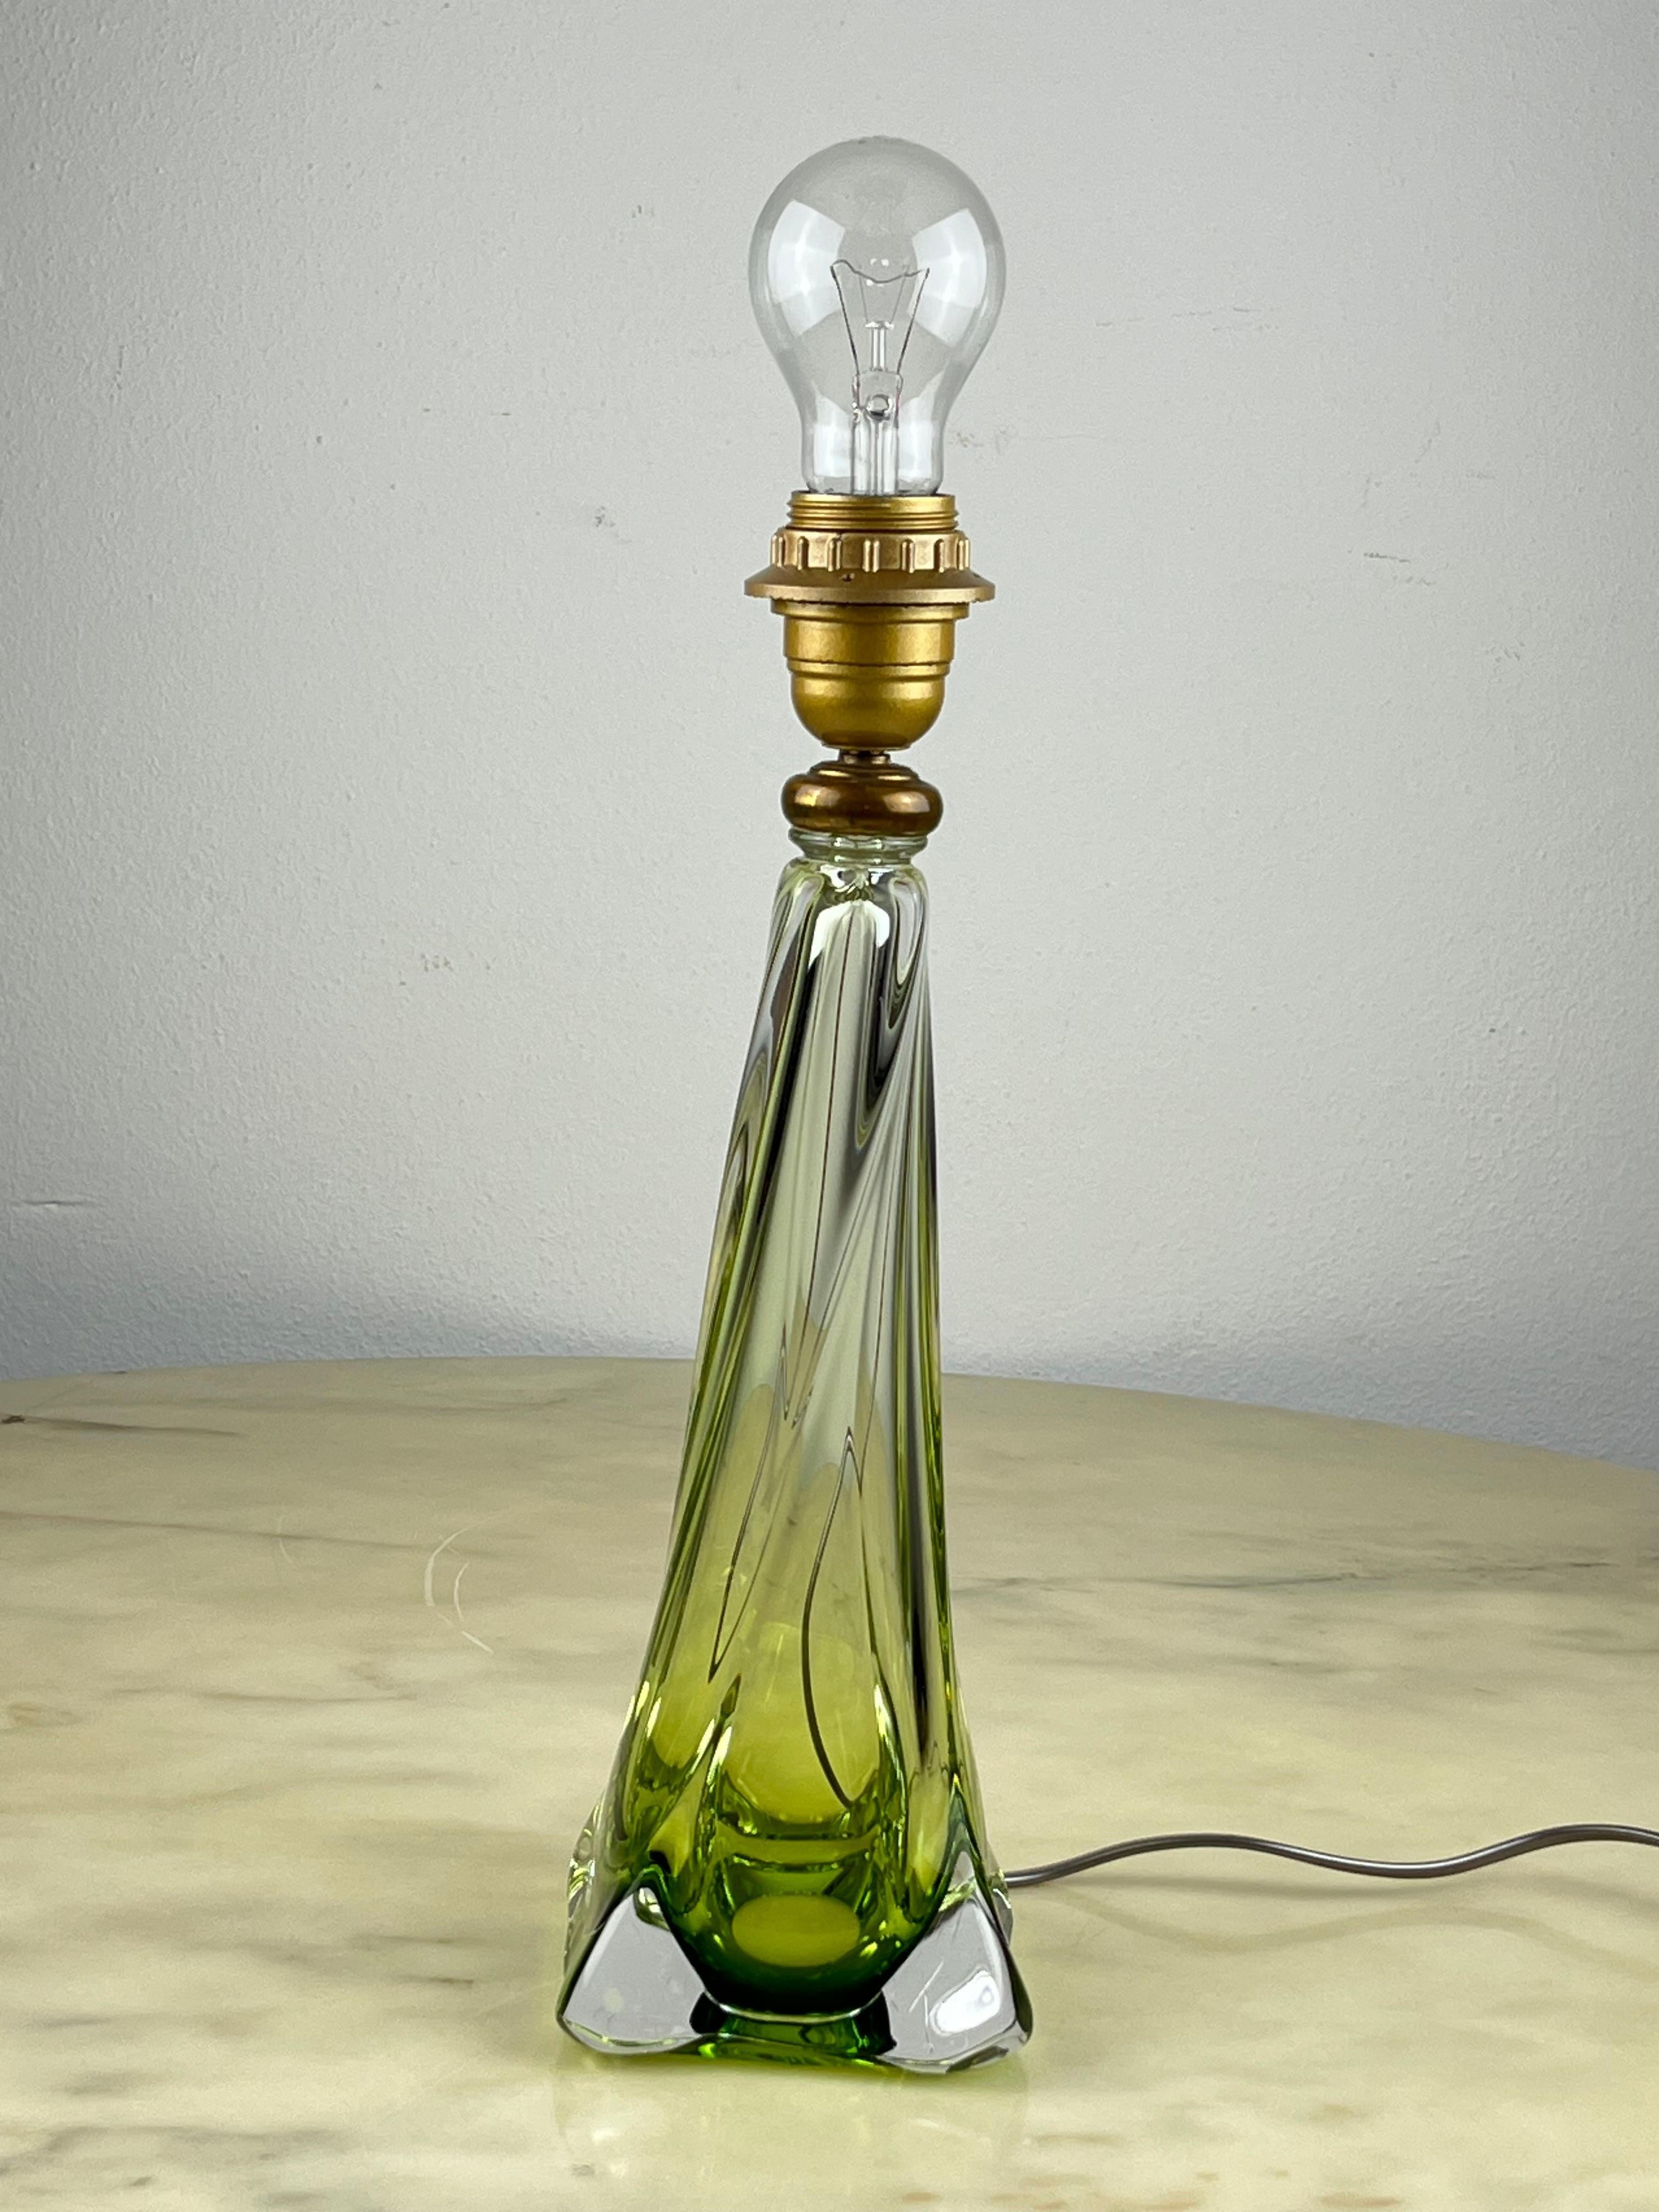 Val Saint Lambert table lamp, lead crystal, Belgium, 1950s.
Brand engraved on the bottom, as per photograph attached in the description. Made by the largest crystal factory in the Benelux, supplier to the Belgian royal family.
Dimensions without